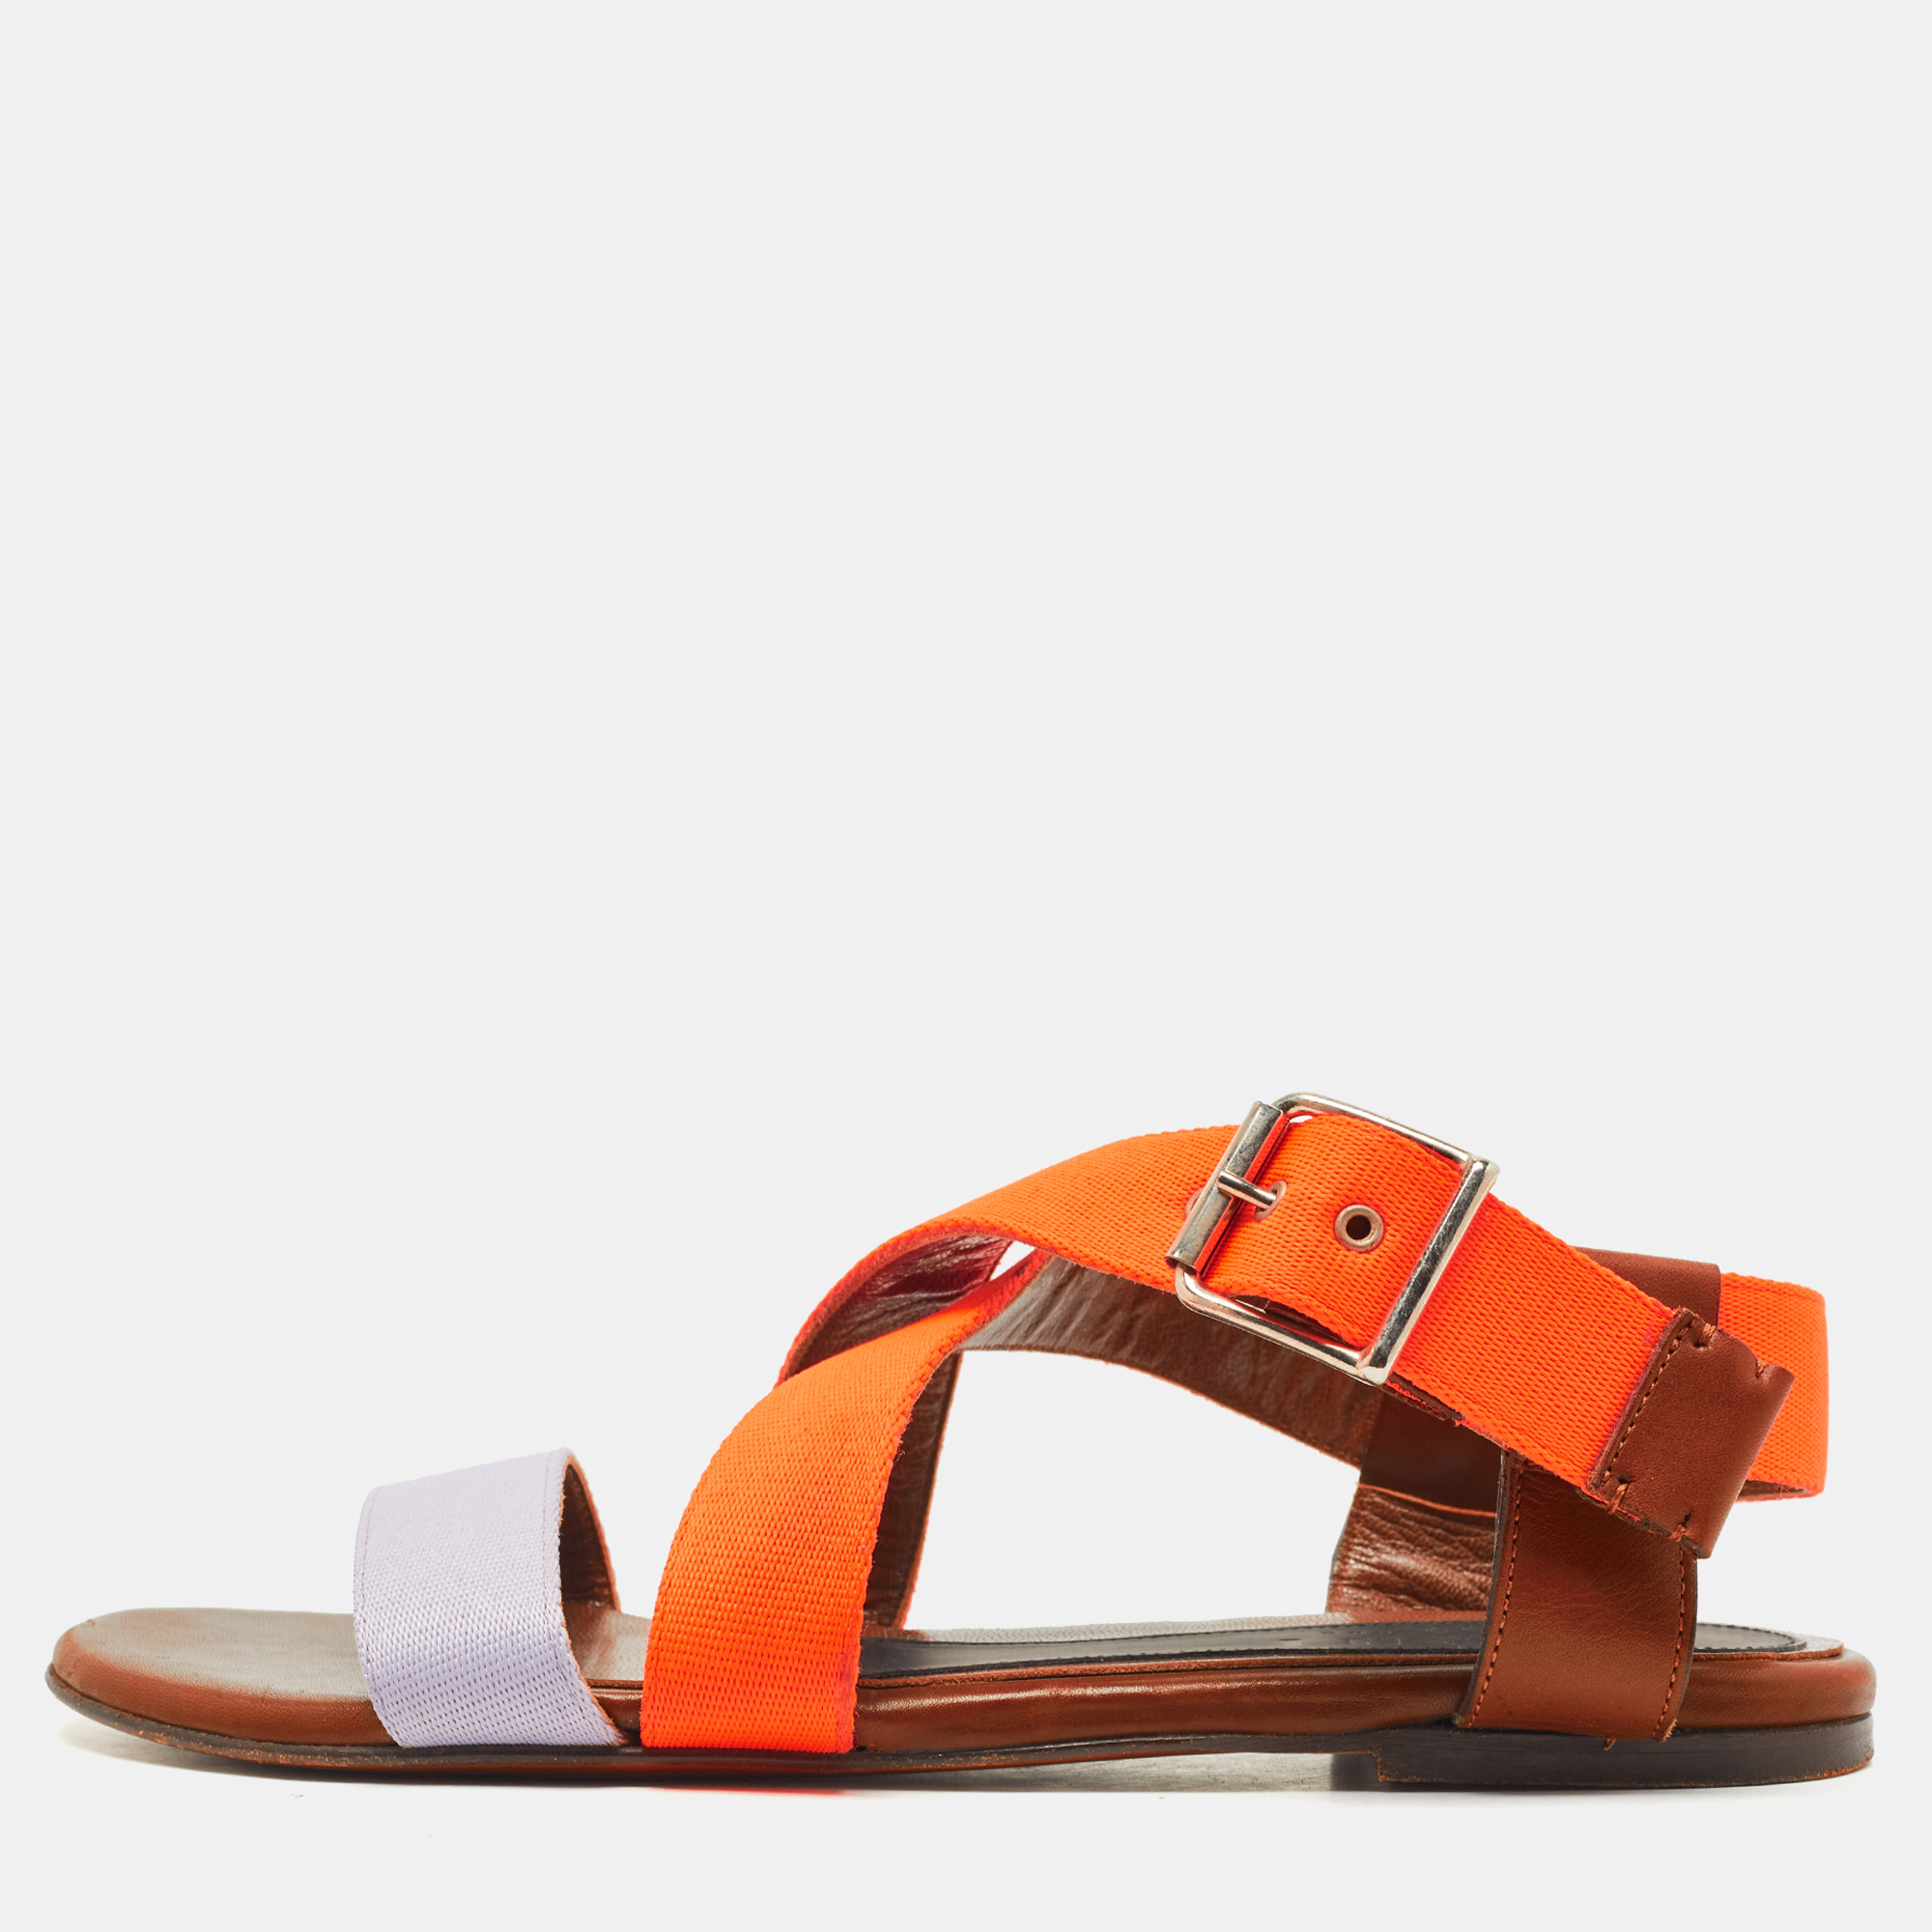 Marni Tricolor Canvas And Leather Flat Sandals Size 36.5